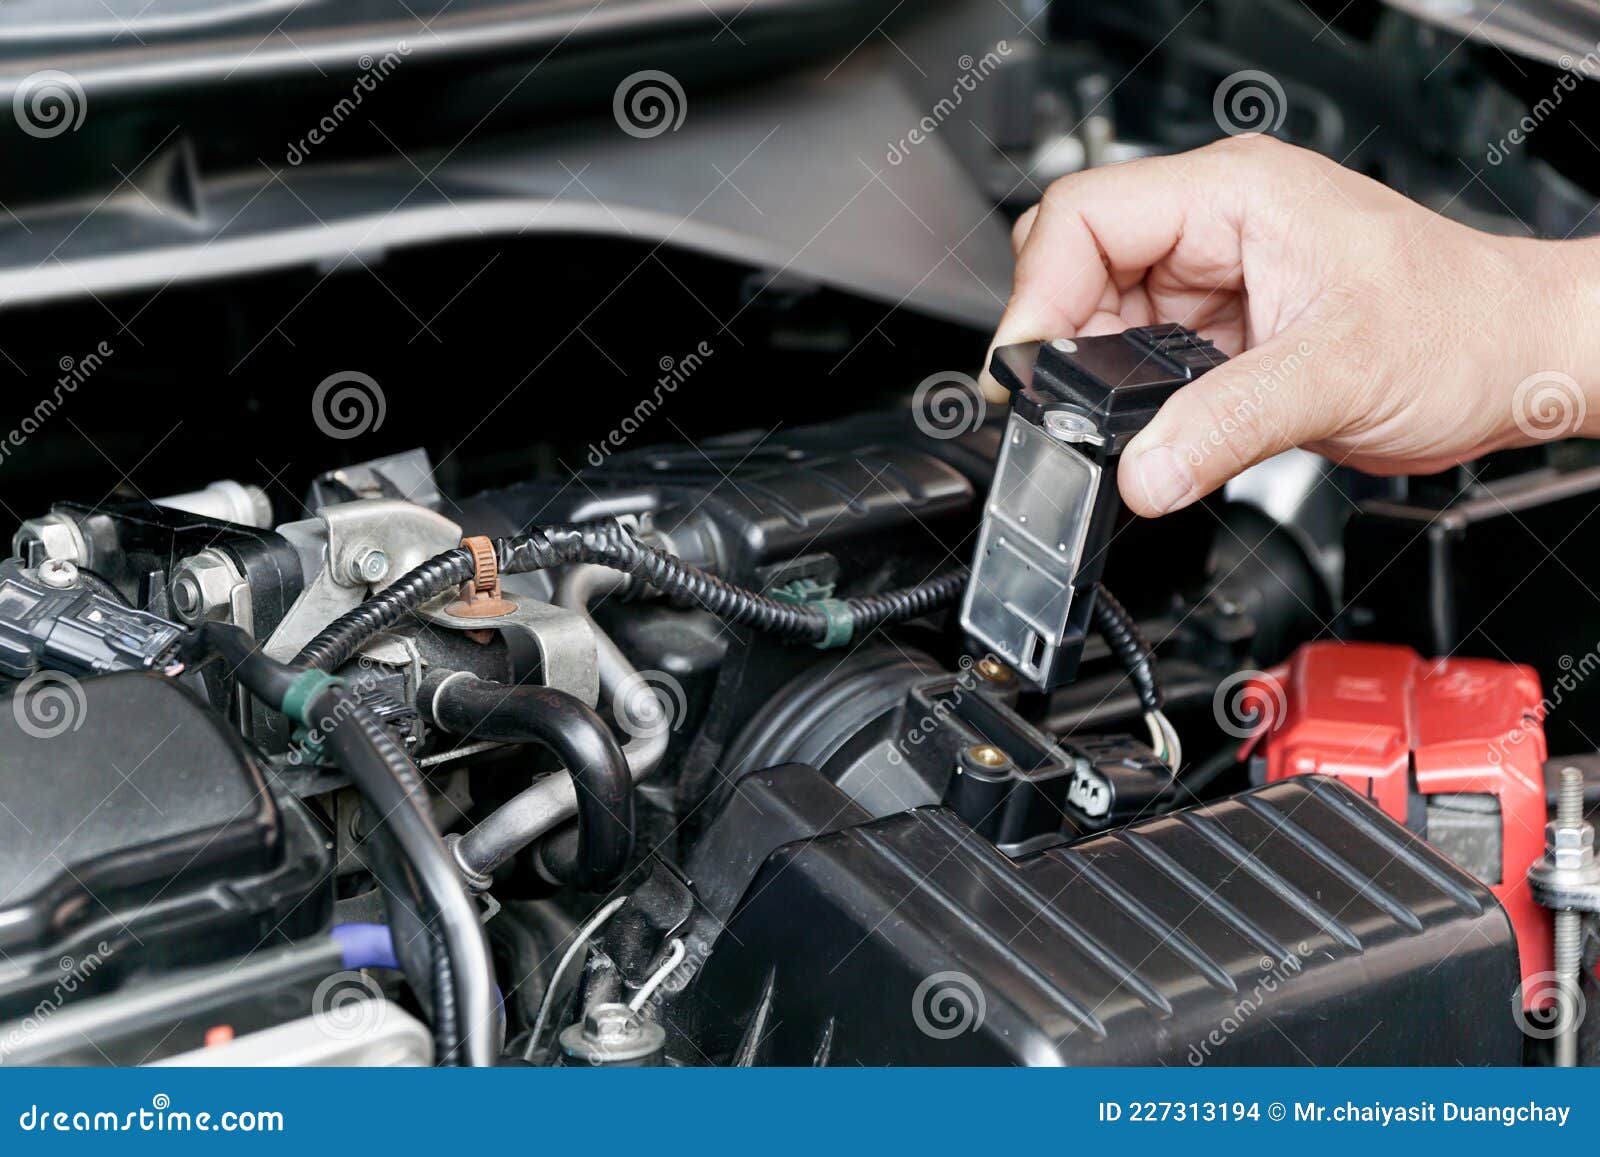 hand a technician remove airflow sensor in the engine room car for check and cleaning in service concept